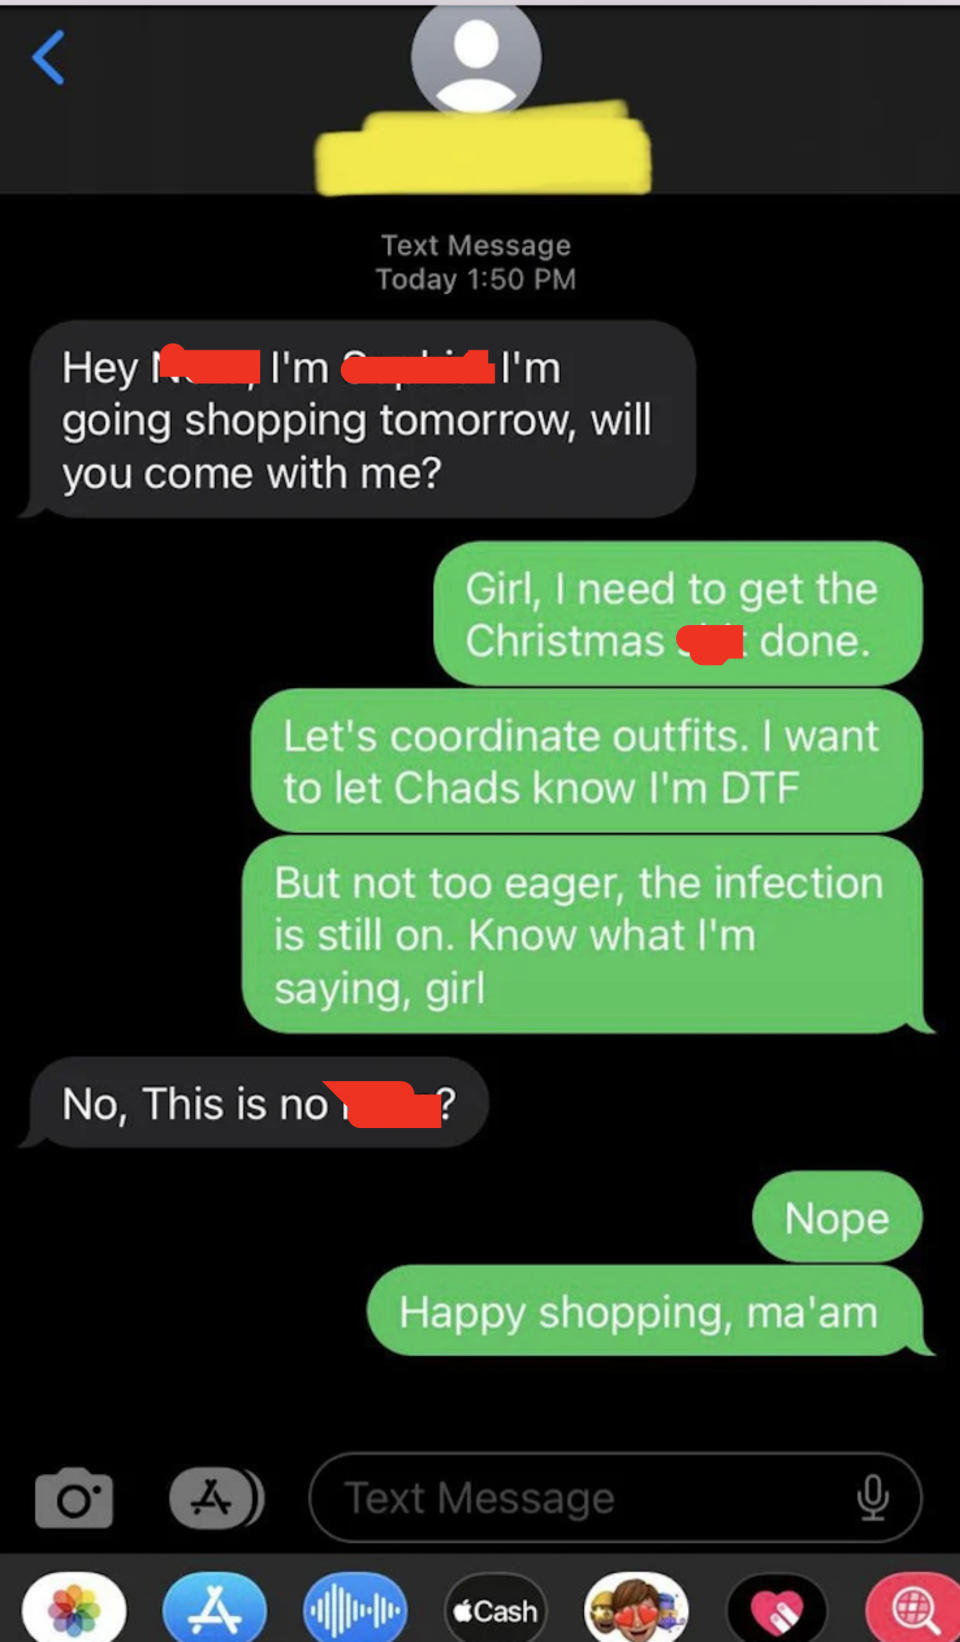 Person texts wrong number asking to go shopping and coordinate outfits to send message to "Chads" that they're "DTF"